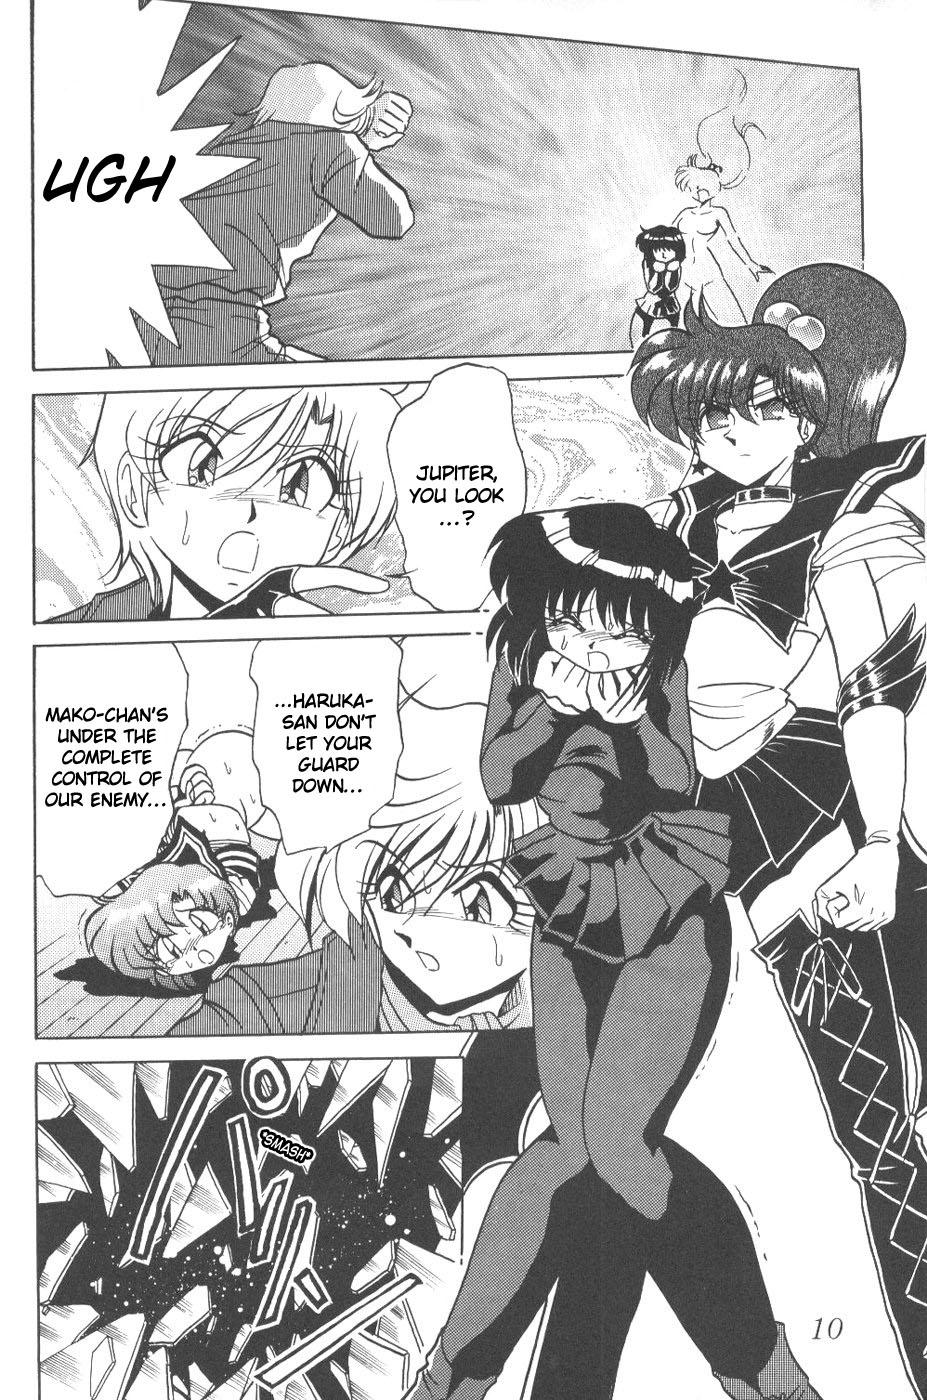 Clothed Silent Saturn 6 - Sailor moon Abg - Page 8